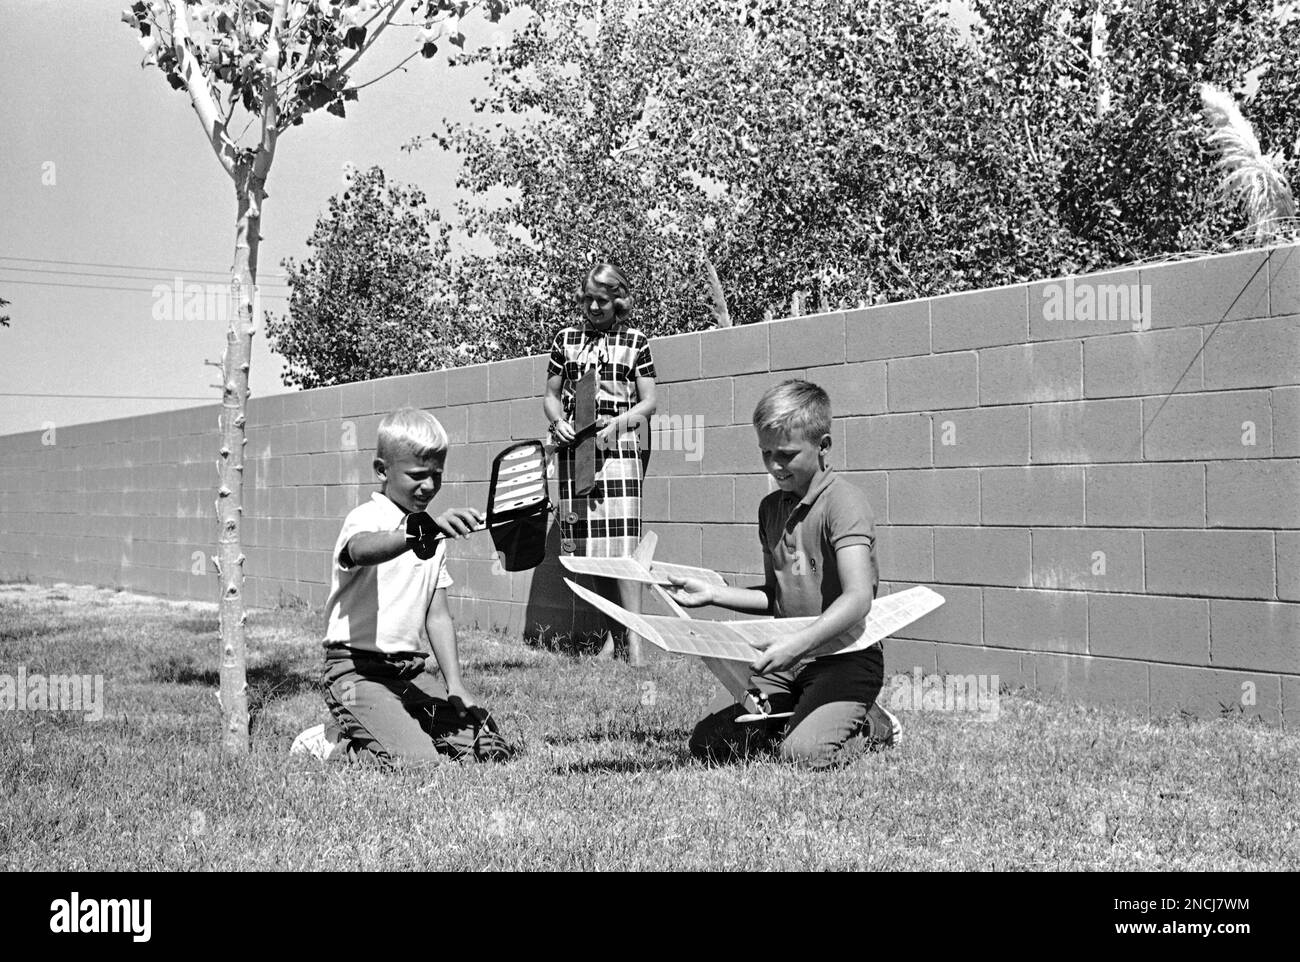 Edwin, left, 9, and Frederick, 11, sons of Air Force Maj. Frank Borman, one  of the nation's new astronauts, play with model airplanes in the backyard  of the Borman home at Edwards